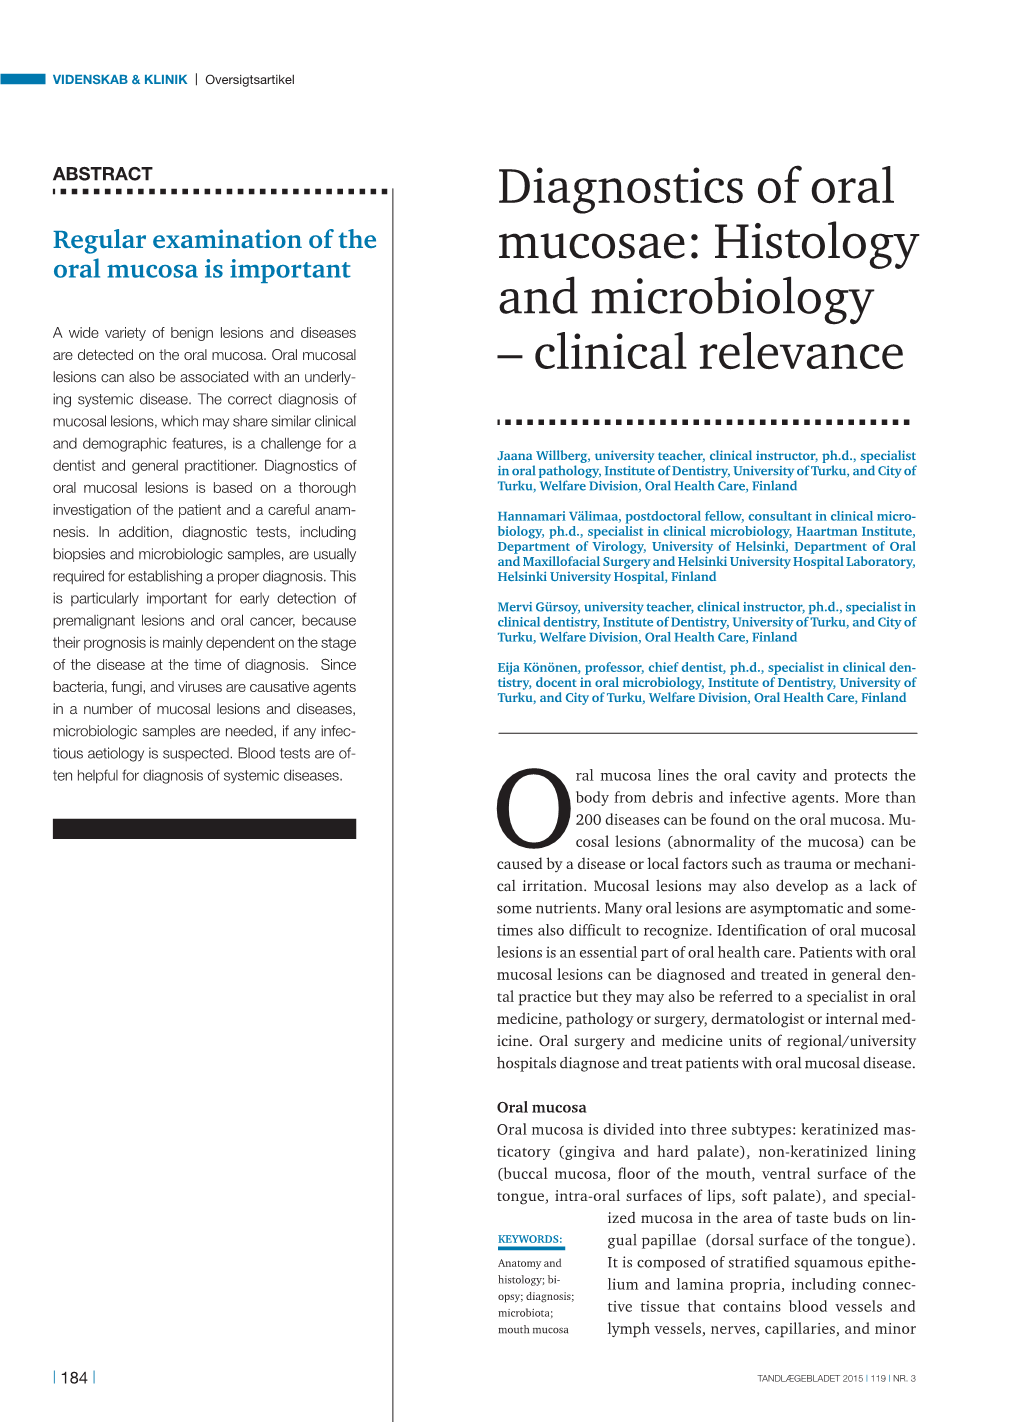 Diagnostics of Oral Mucosae: Histology And